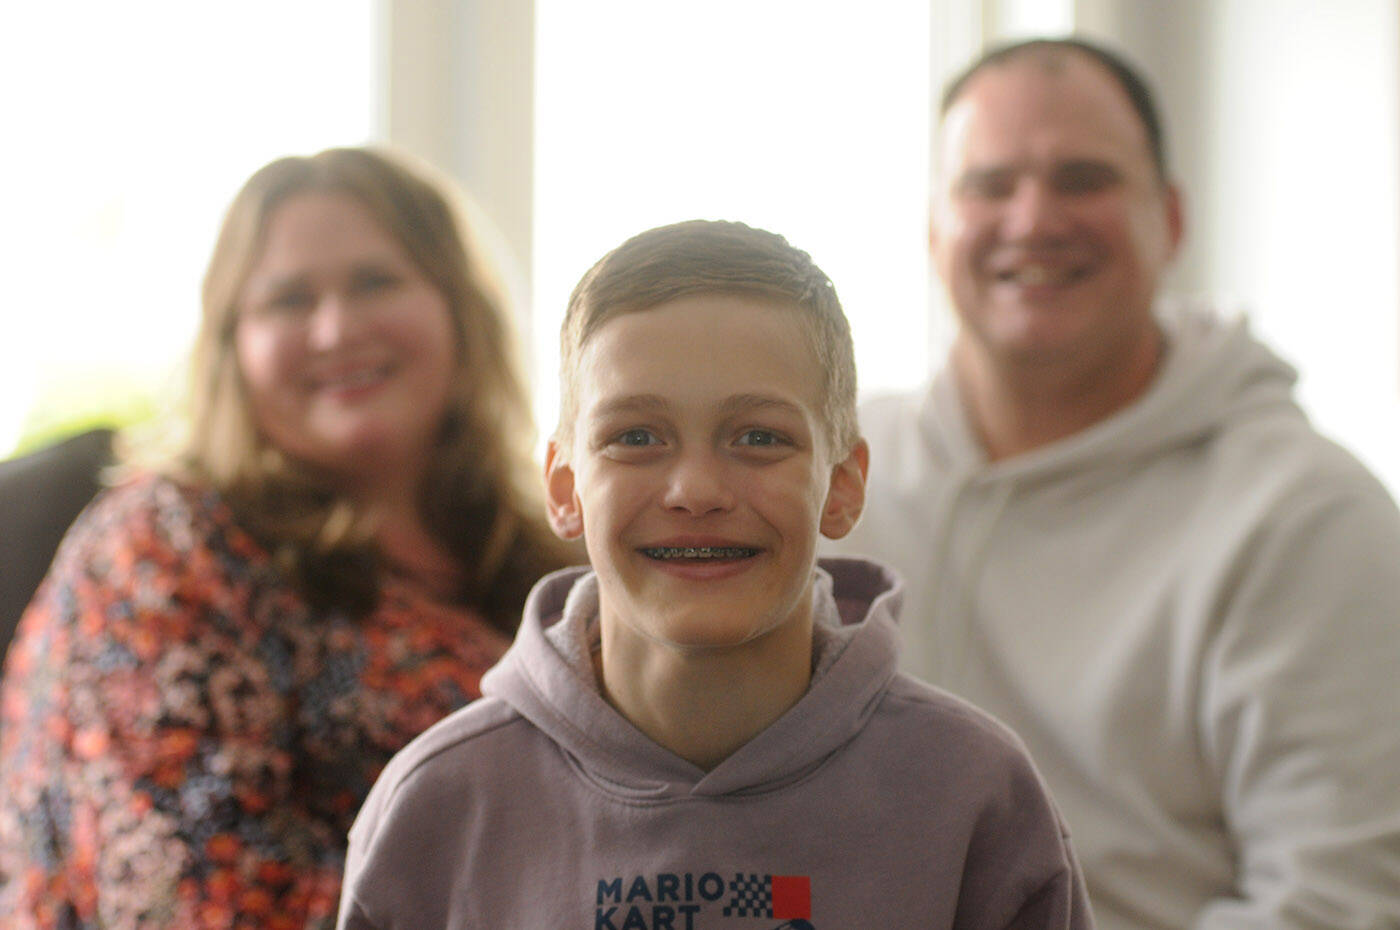 Thirteen-year-old Madden Wicker-Vriend, seen here with his parents Eryn and Jesse on May 27, 2022, is on dialysis at home in Chilliwack and is looking for a living kidney donor. (Jenna Hauck/ Chilliwack Progress)